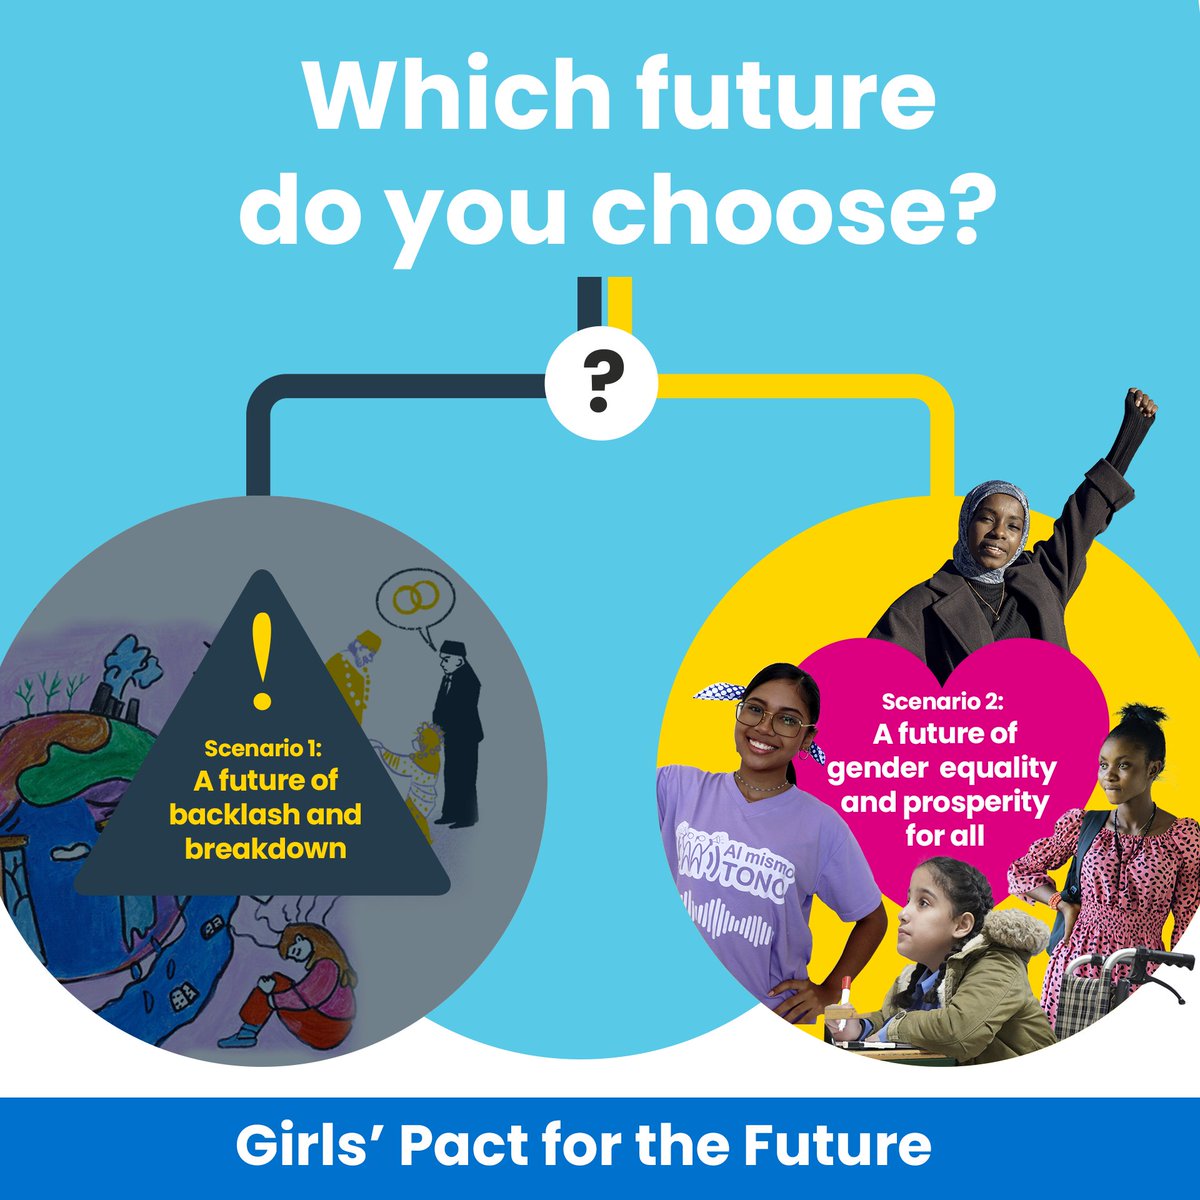 At the launch of the Girls' Pact for the Future, young people are asking world leaders, which is the future you choose? #FutureGirlsWant